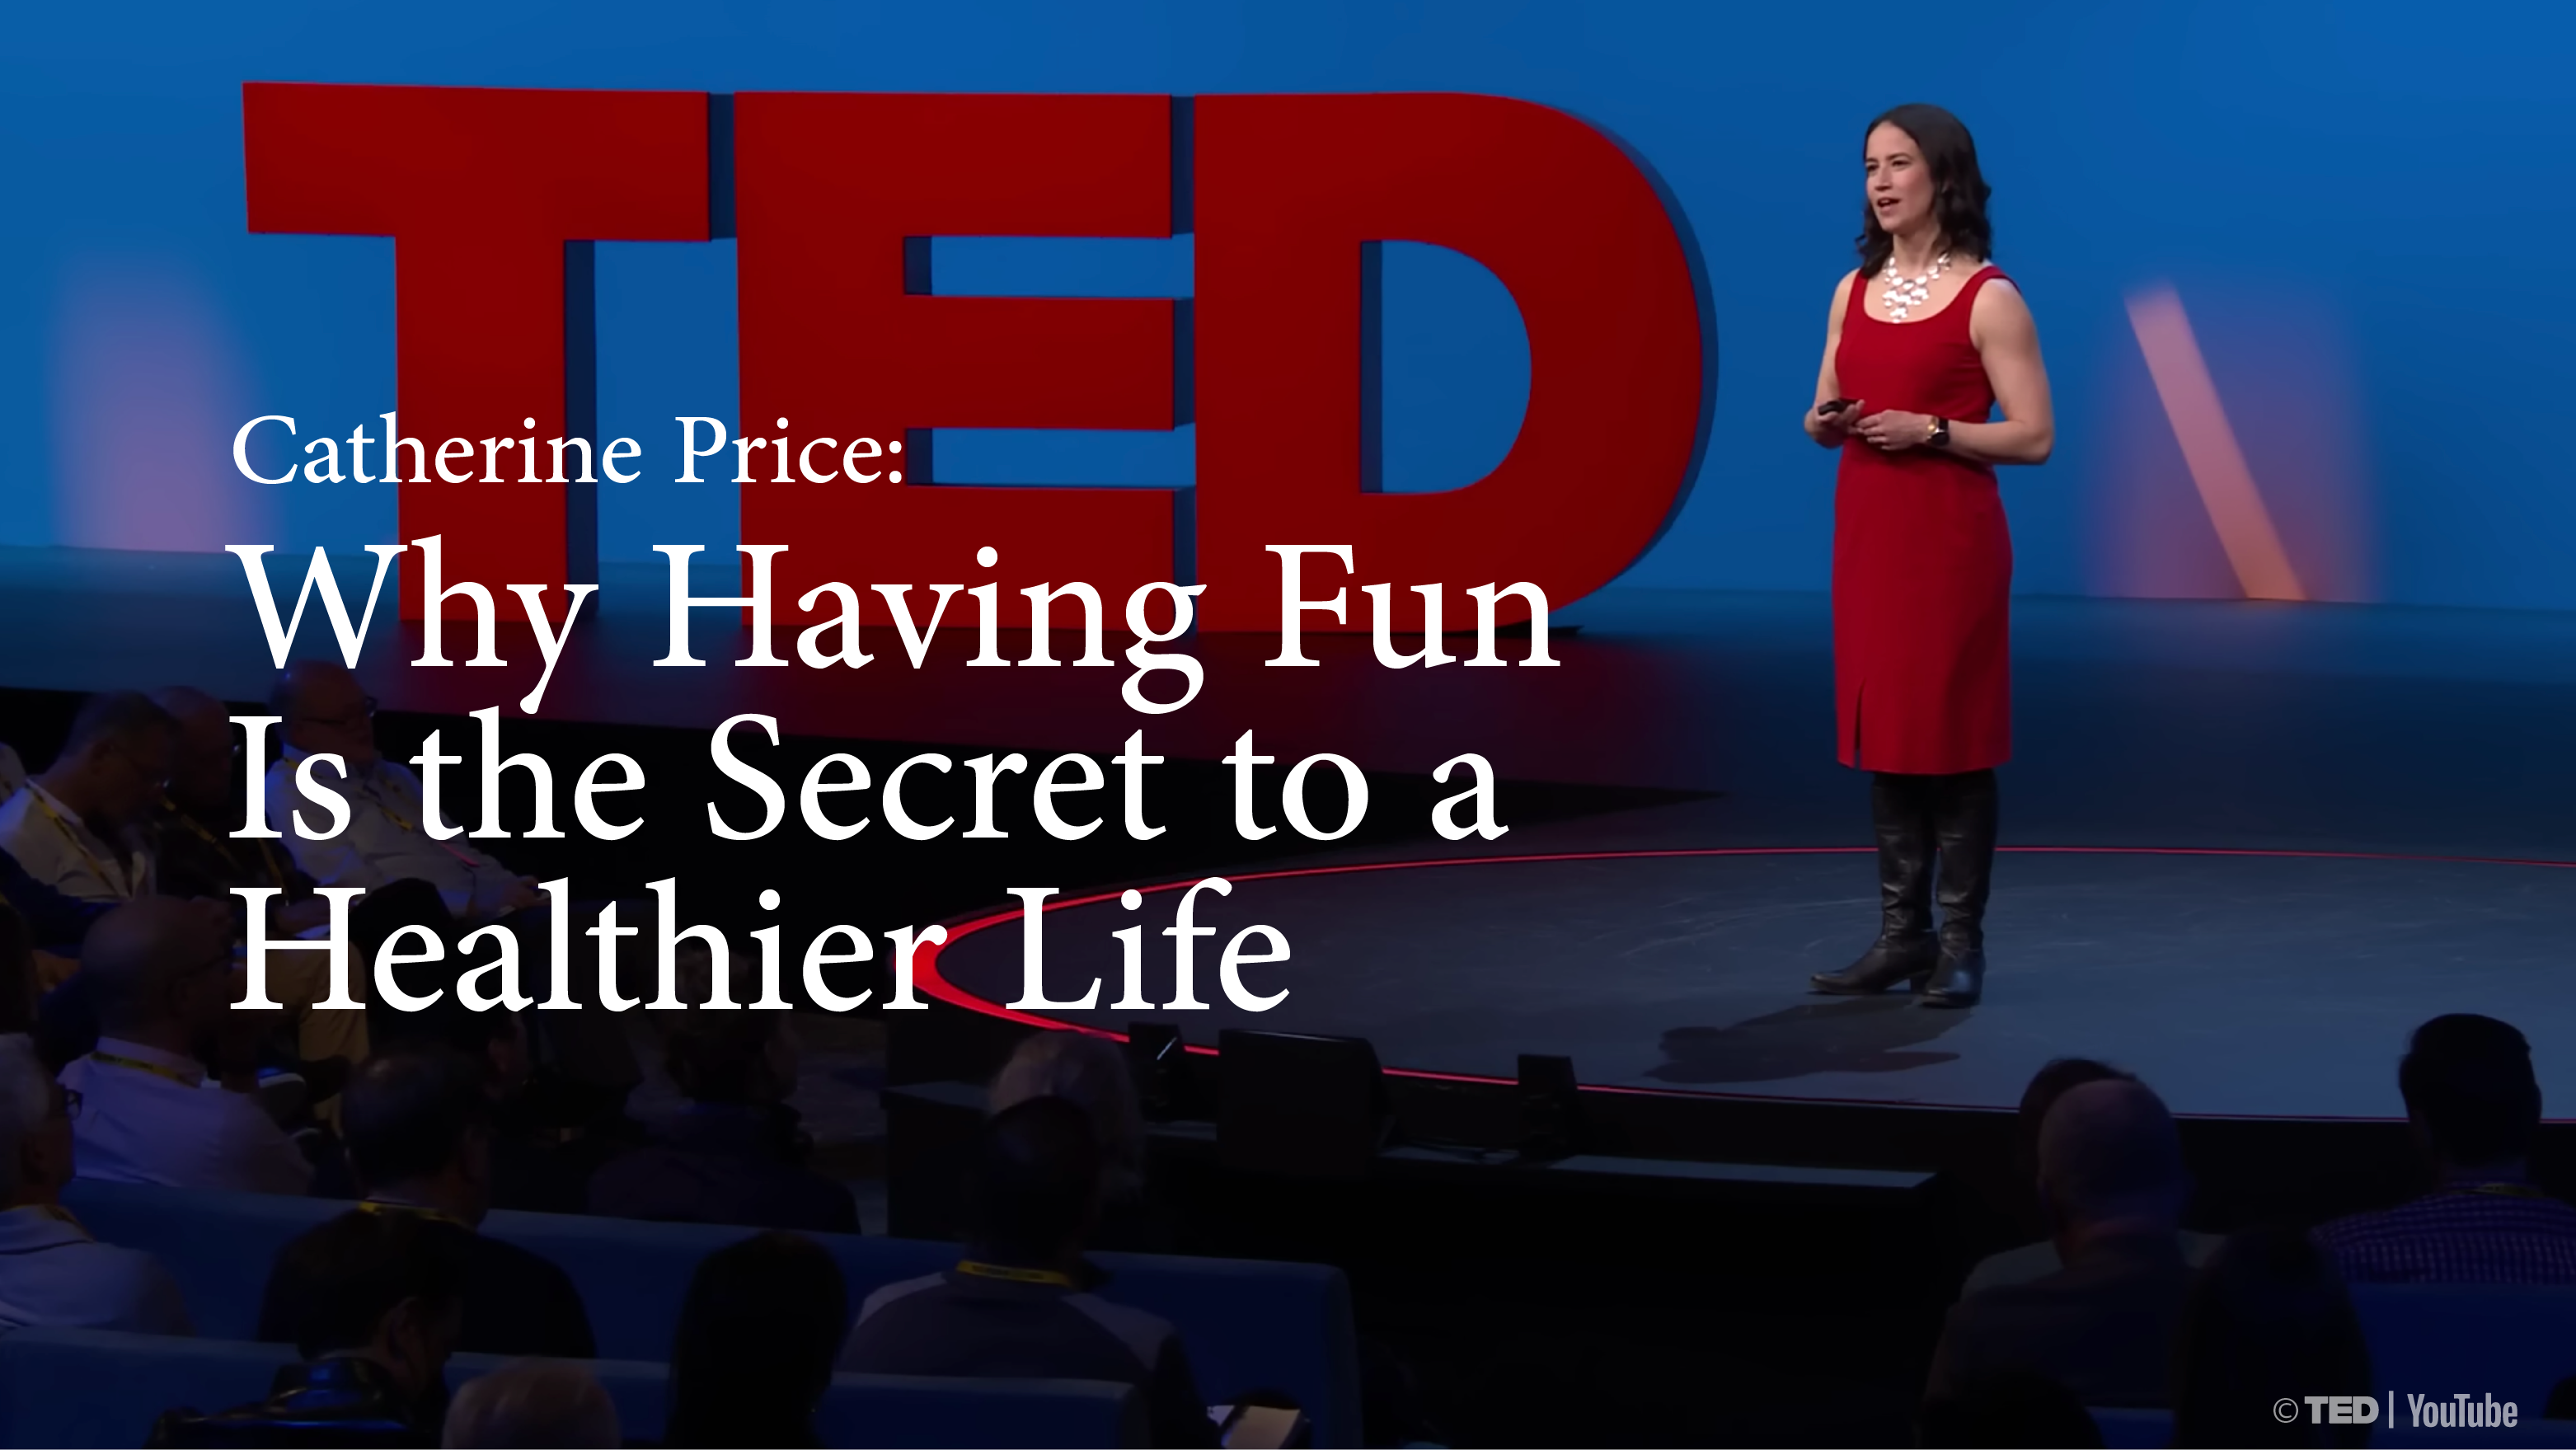 [C+] Why Having Fun Is the Secret to a Healthier Life [PRACTICE]